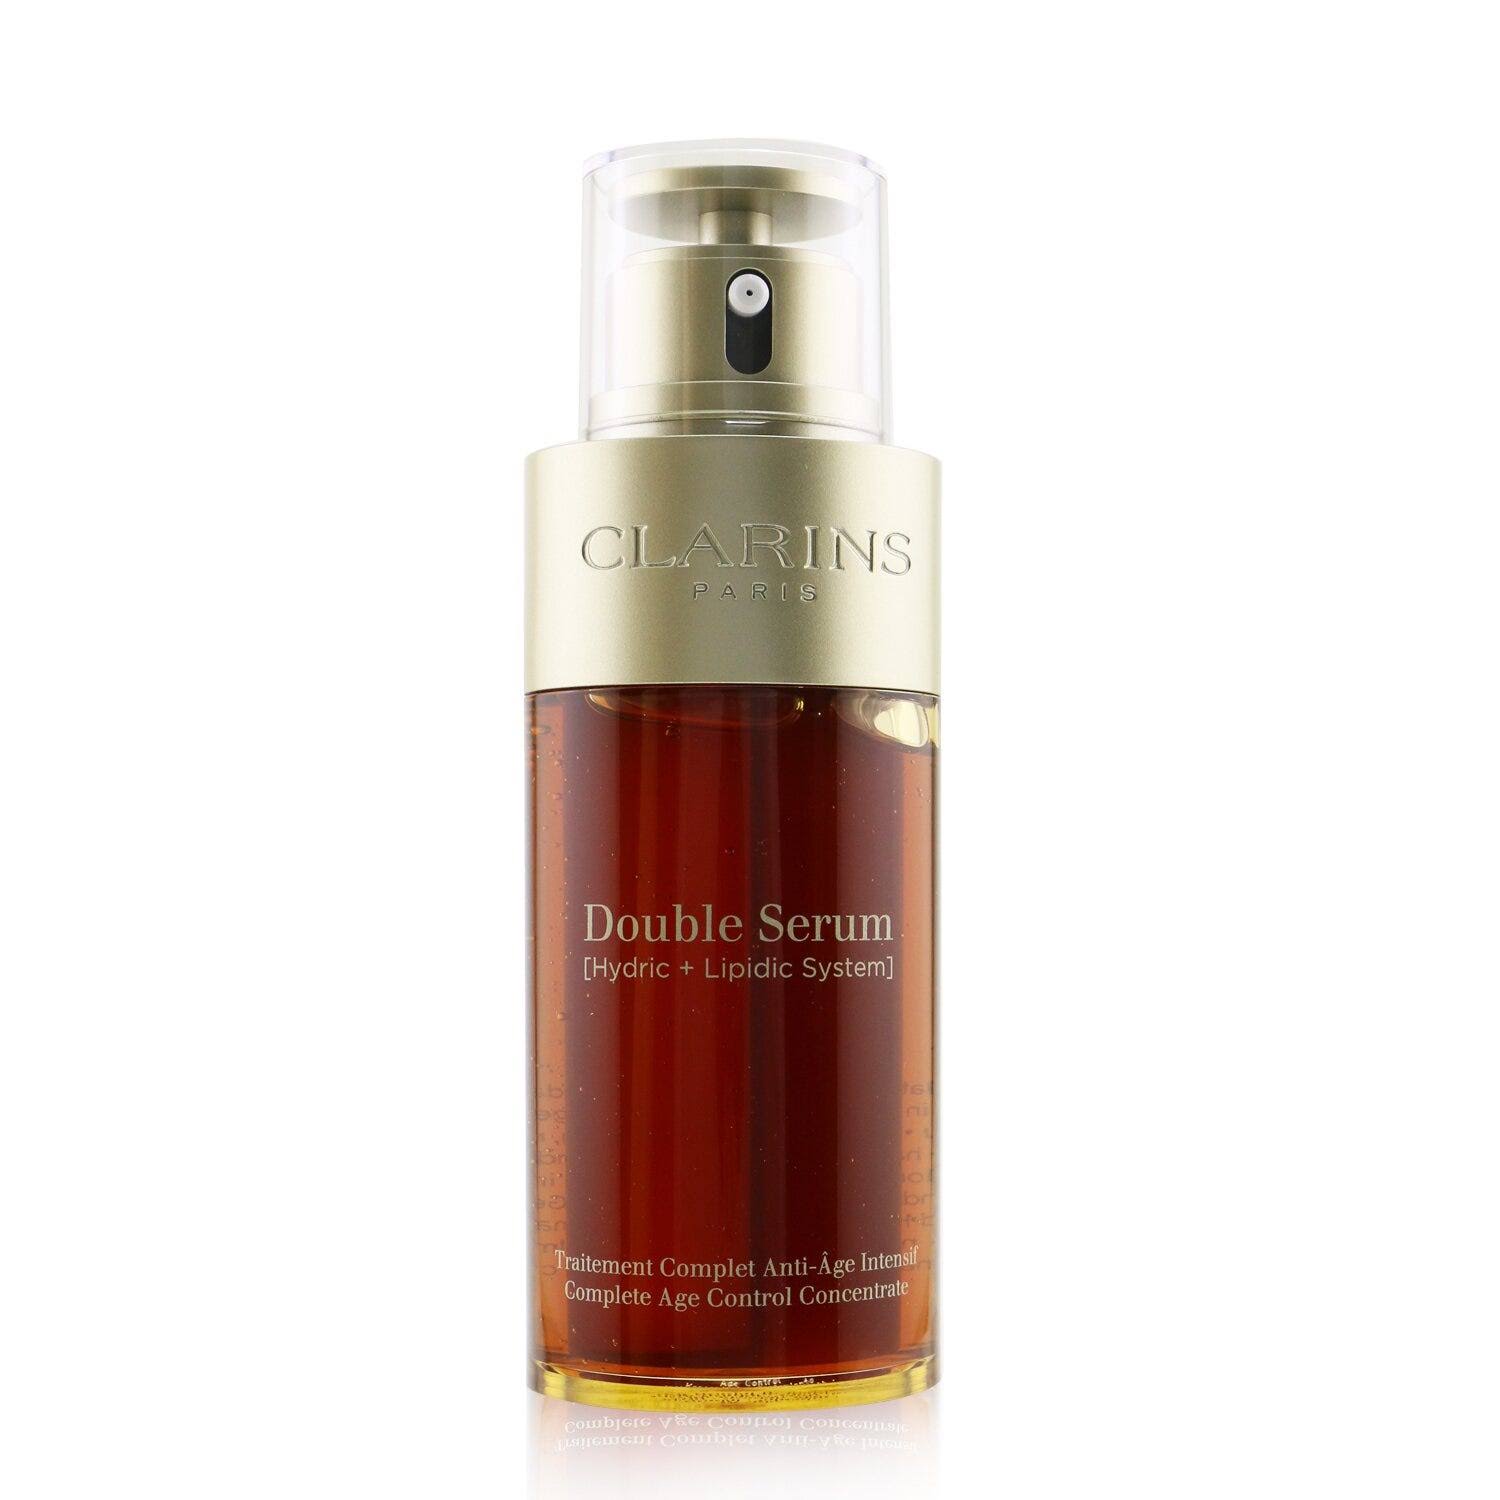 Clarins Double Serum (Hydric + Lipidic System) Complete Age Control 75ml